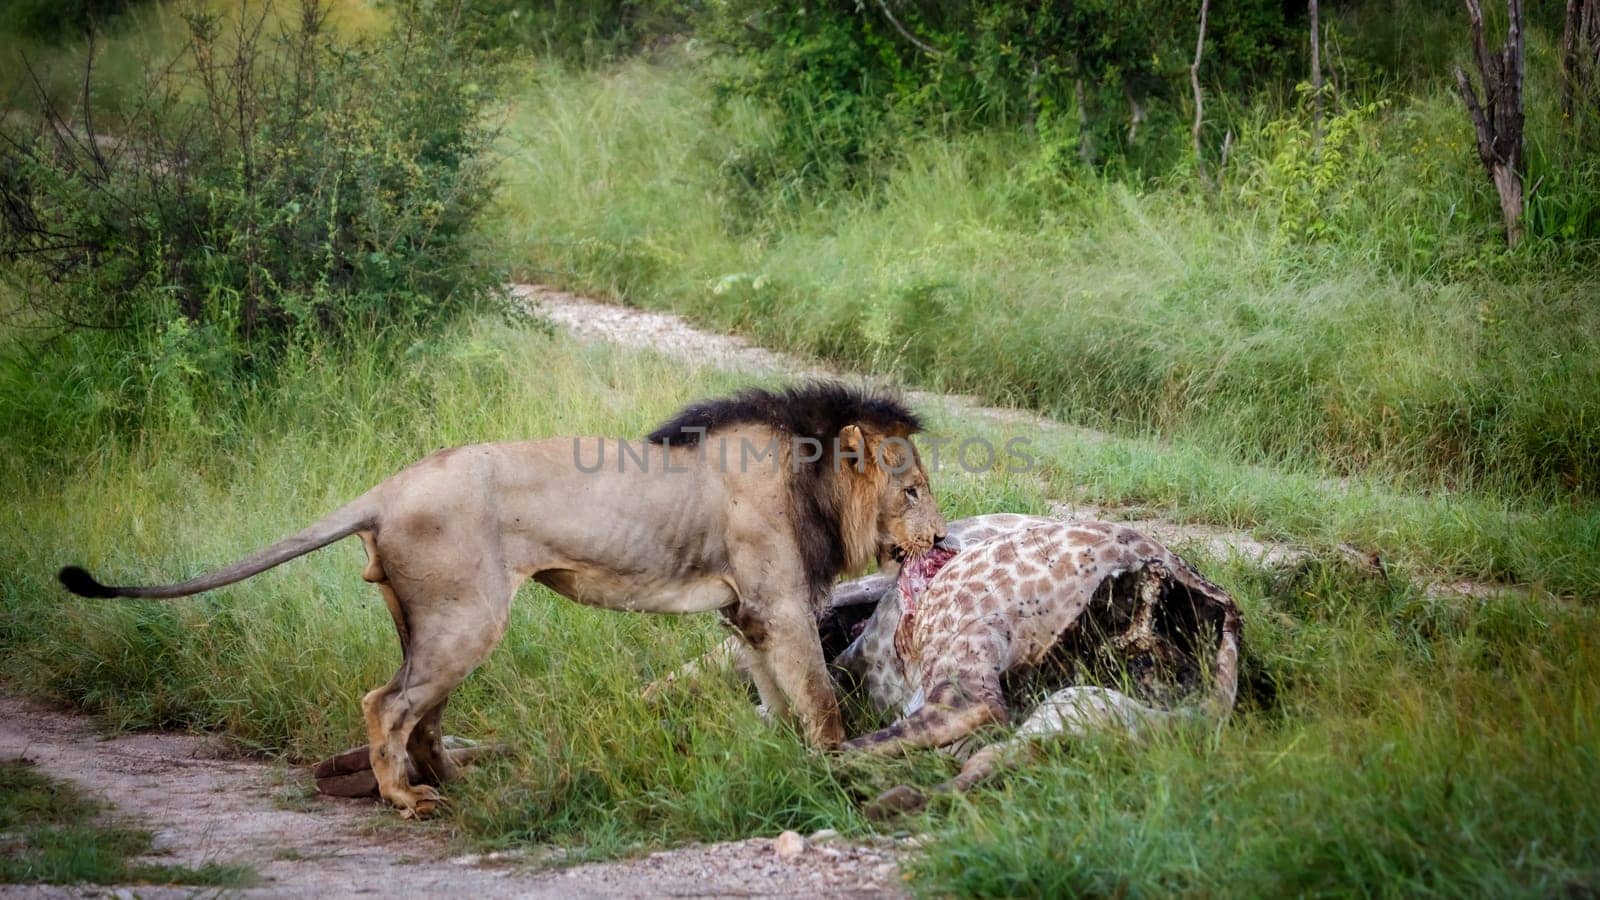 African lion male eating a giraffe carcass in Kruger National park, South Africa ; Specie Panthera leo family of Felidae